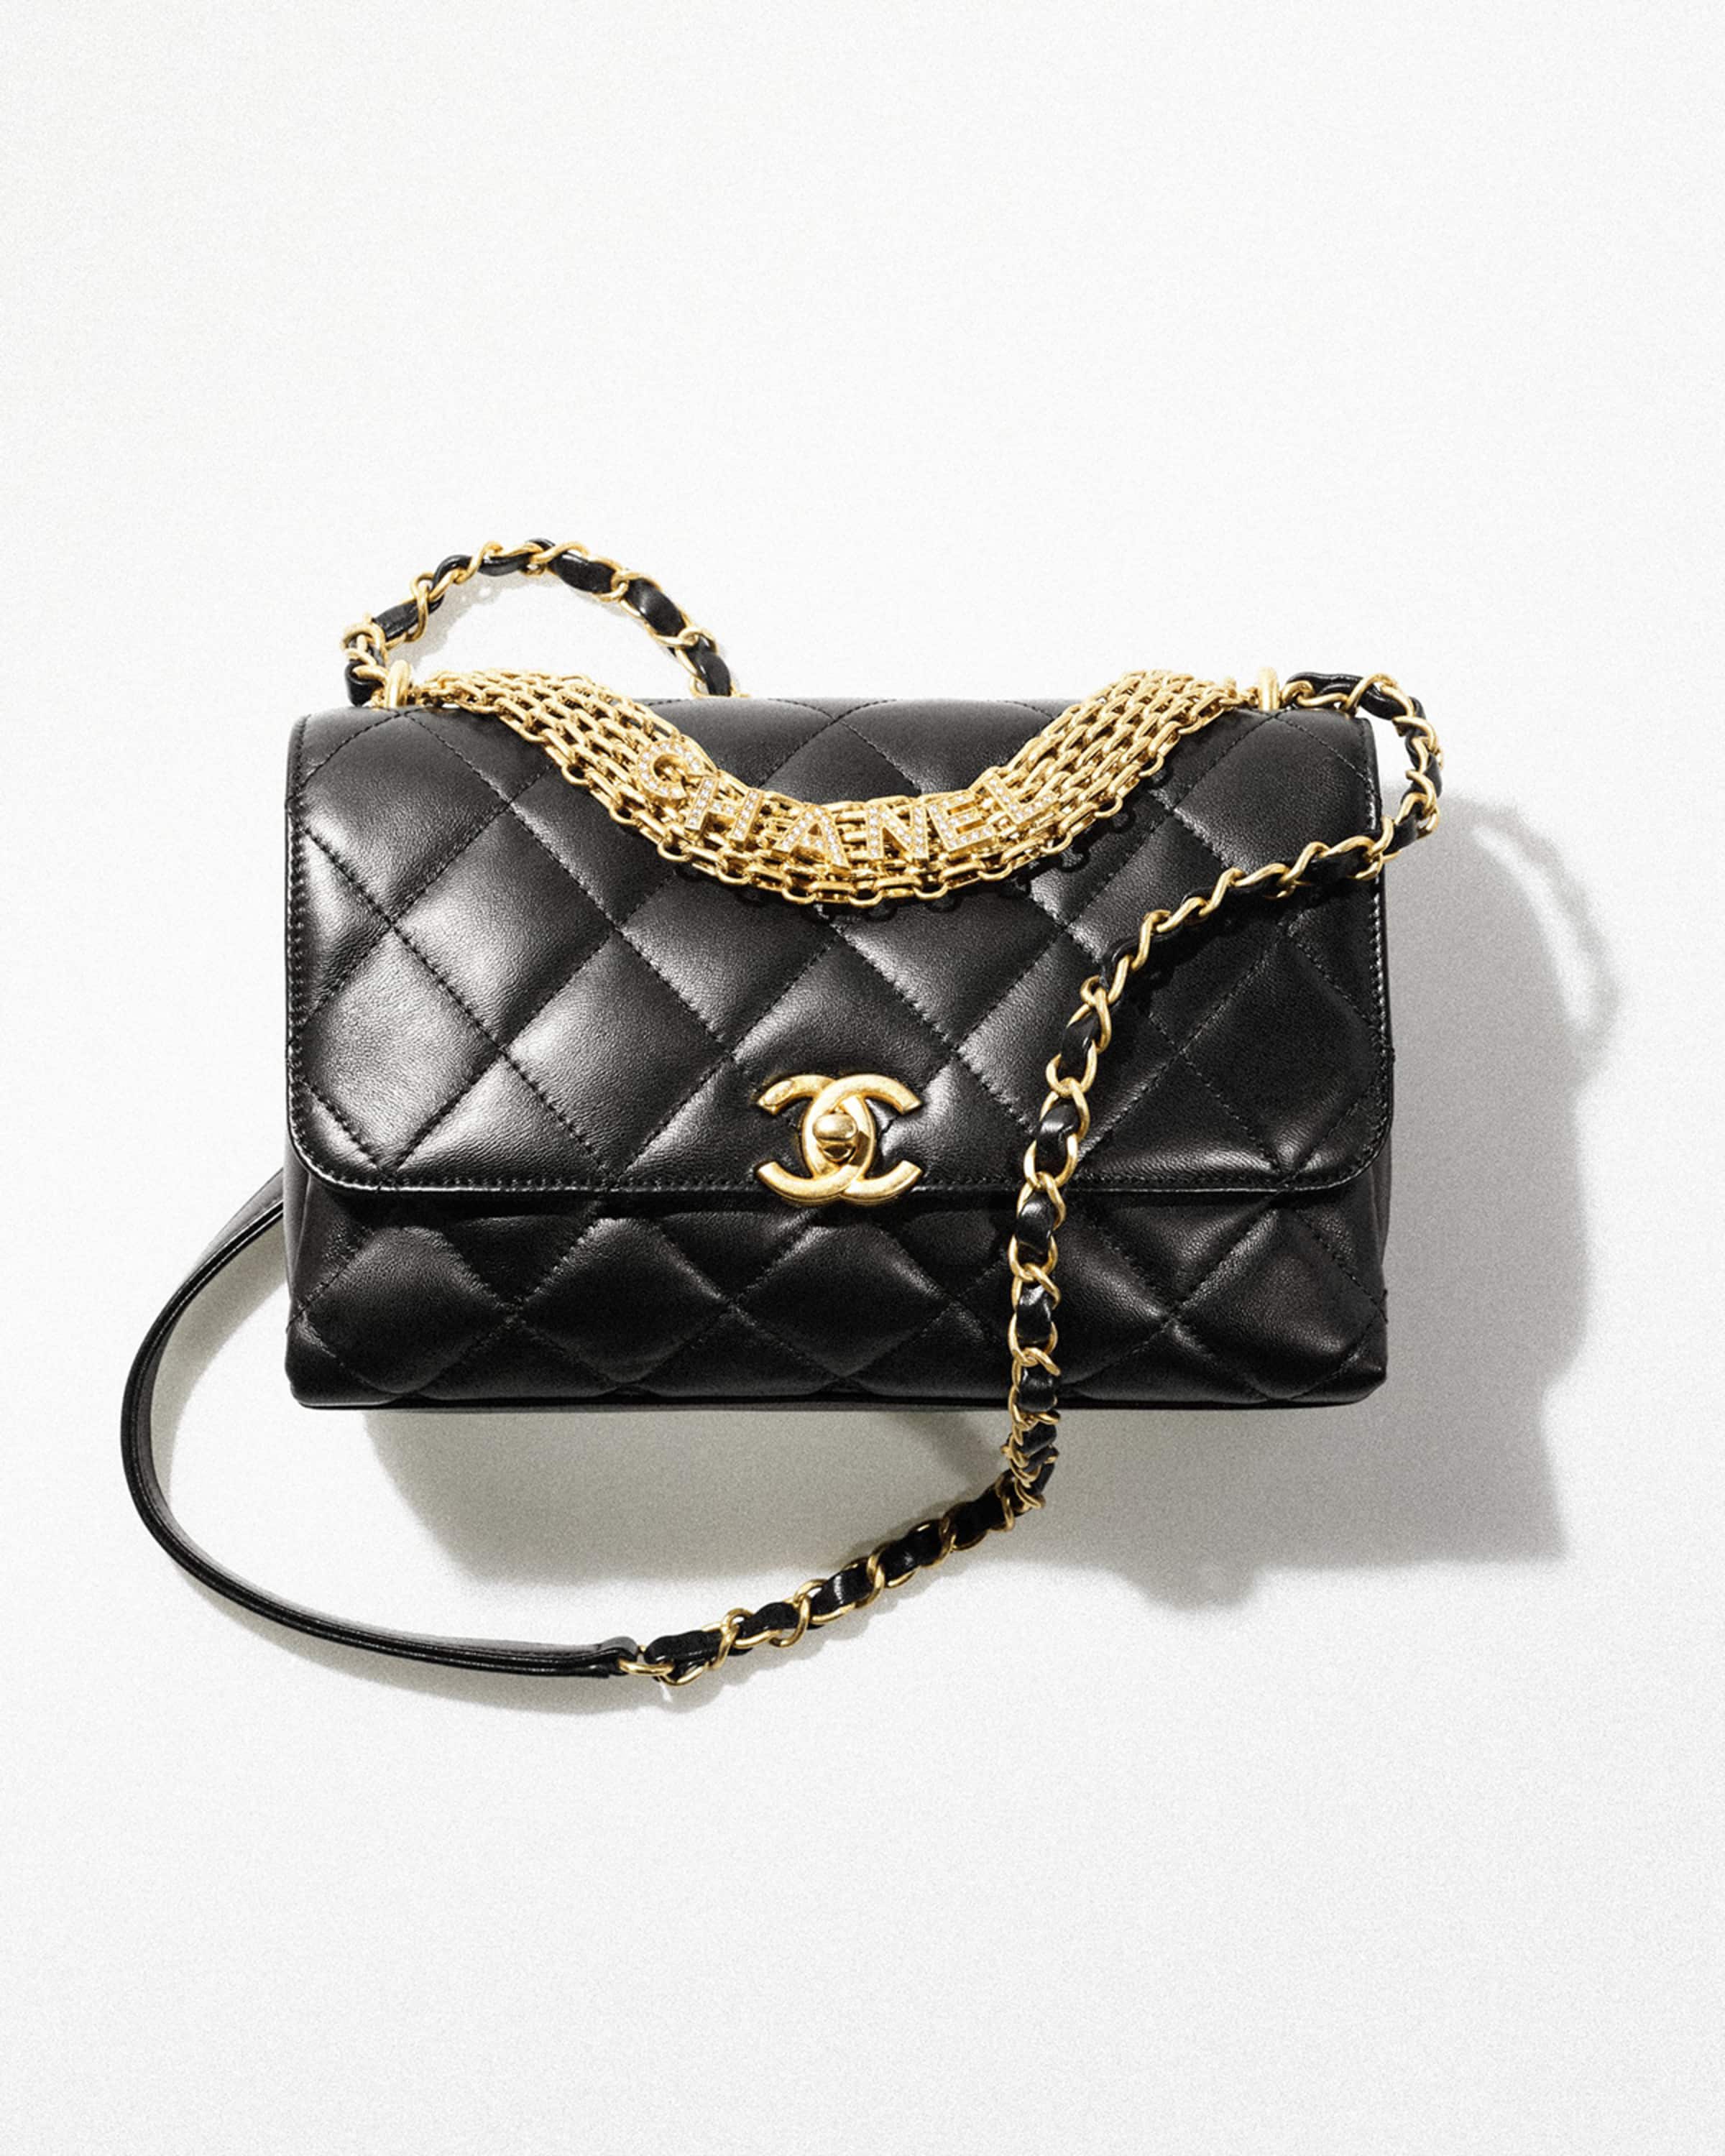 CHANEL SMALL FLAP BAG | Neiman Marcus